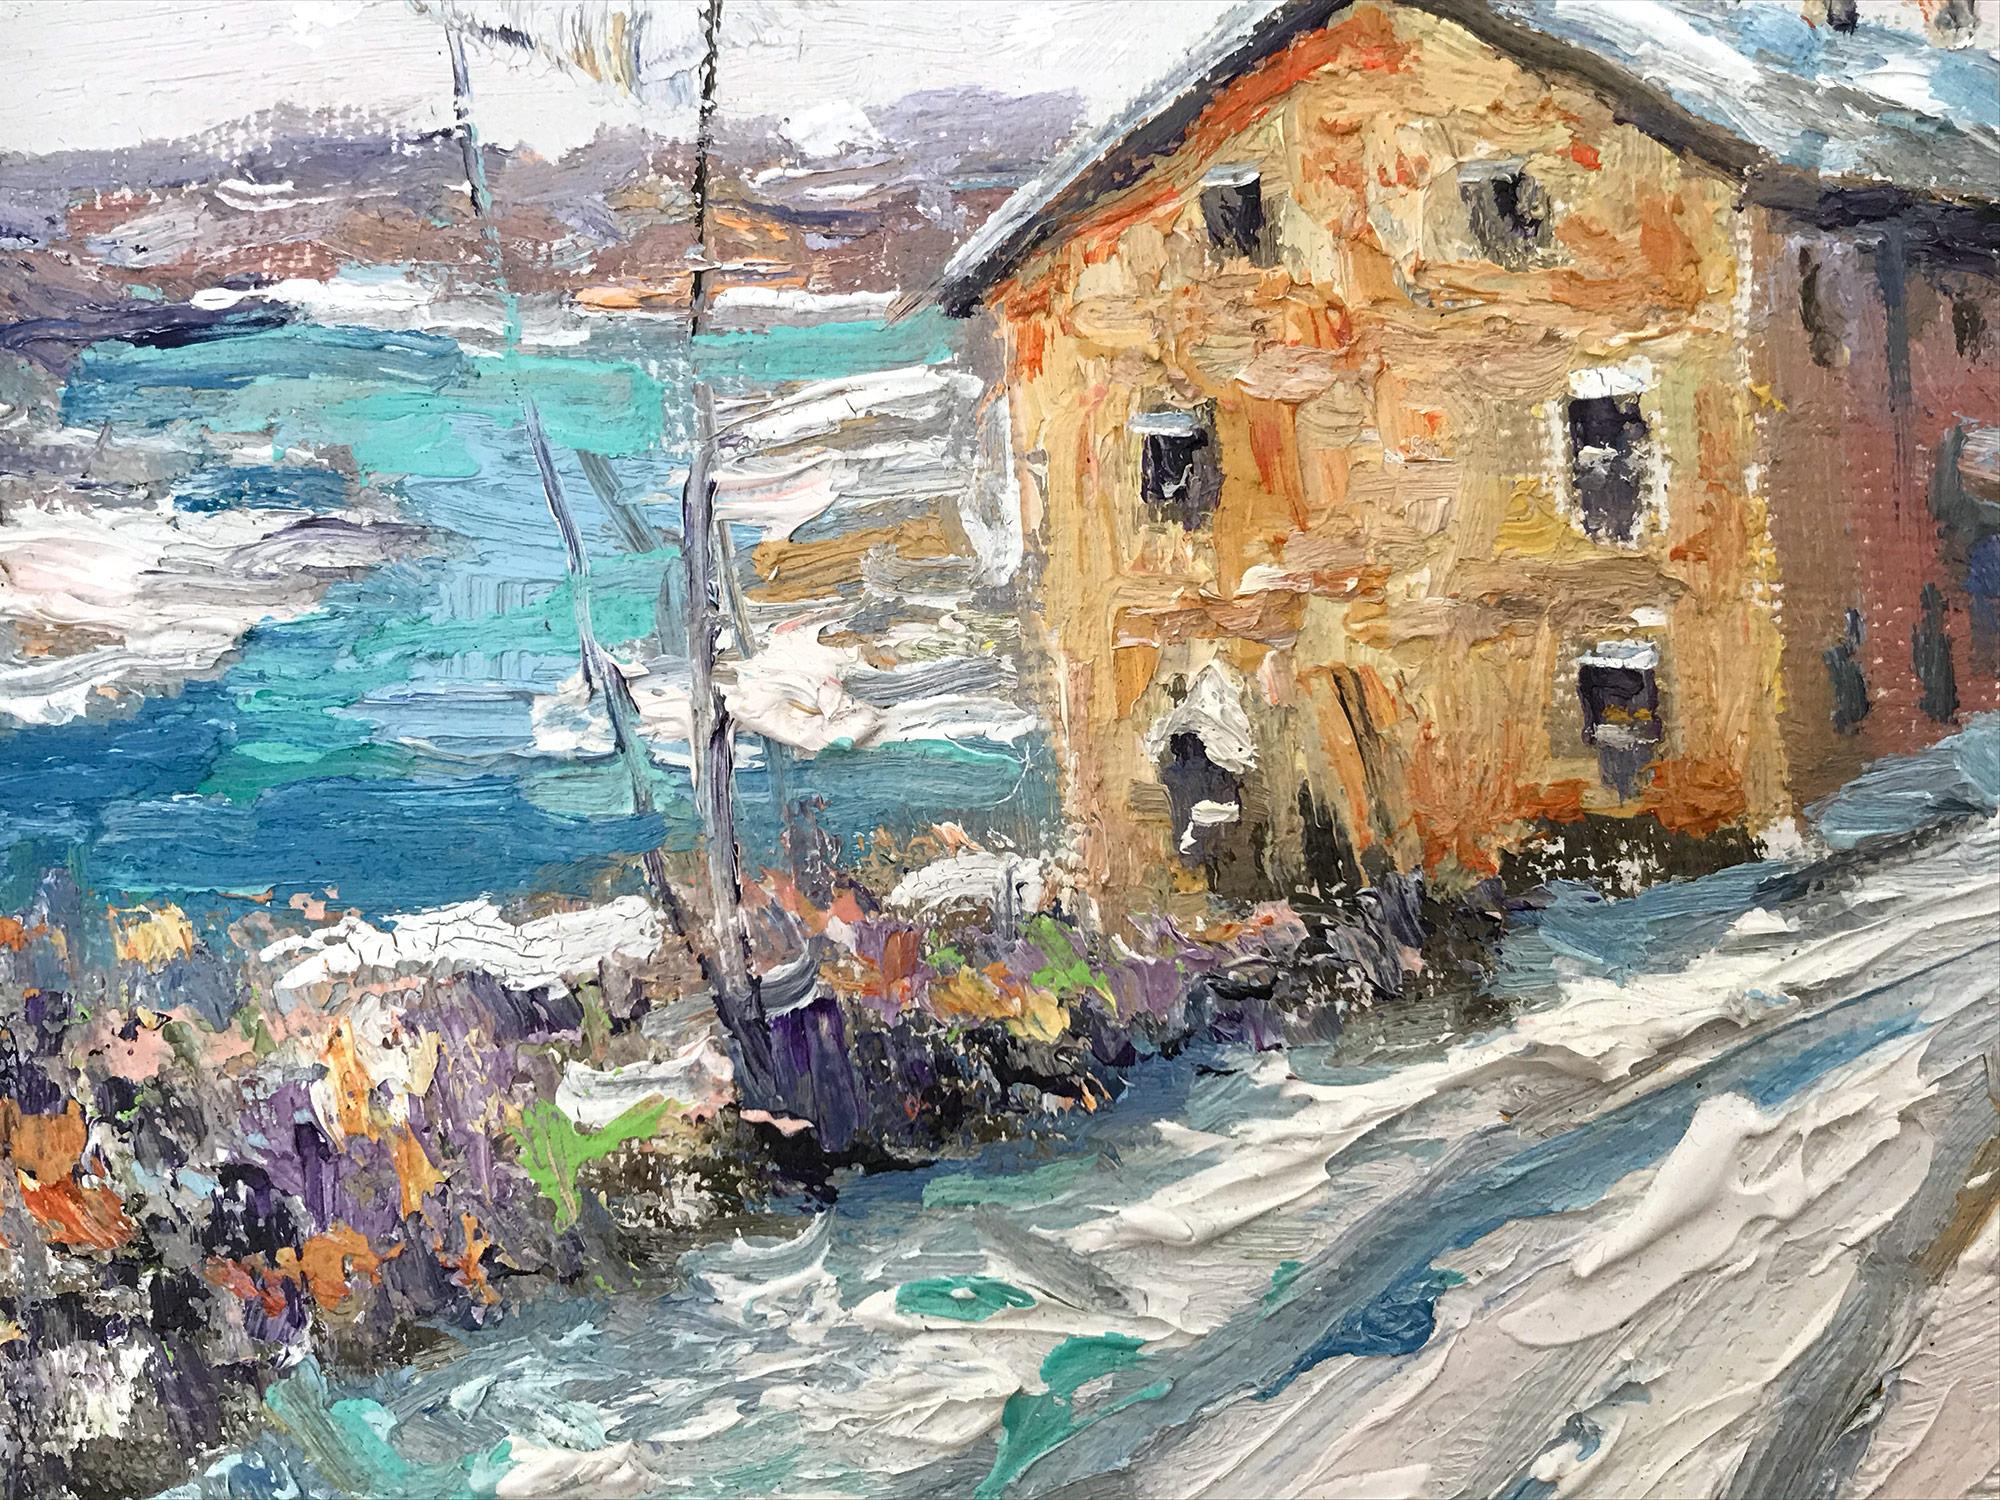 Impressionist winter pastoral scene of a quaint snow covered farm house near the water in Upper Bucks County, PA. Willet has portrayed this piece in a most intimate, yet energetic way, and has packed much feeling into this miniature work. It is